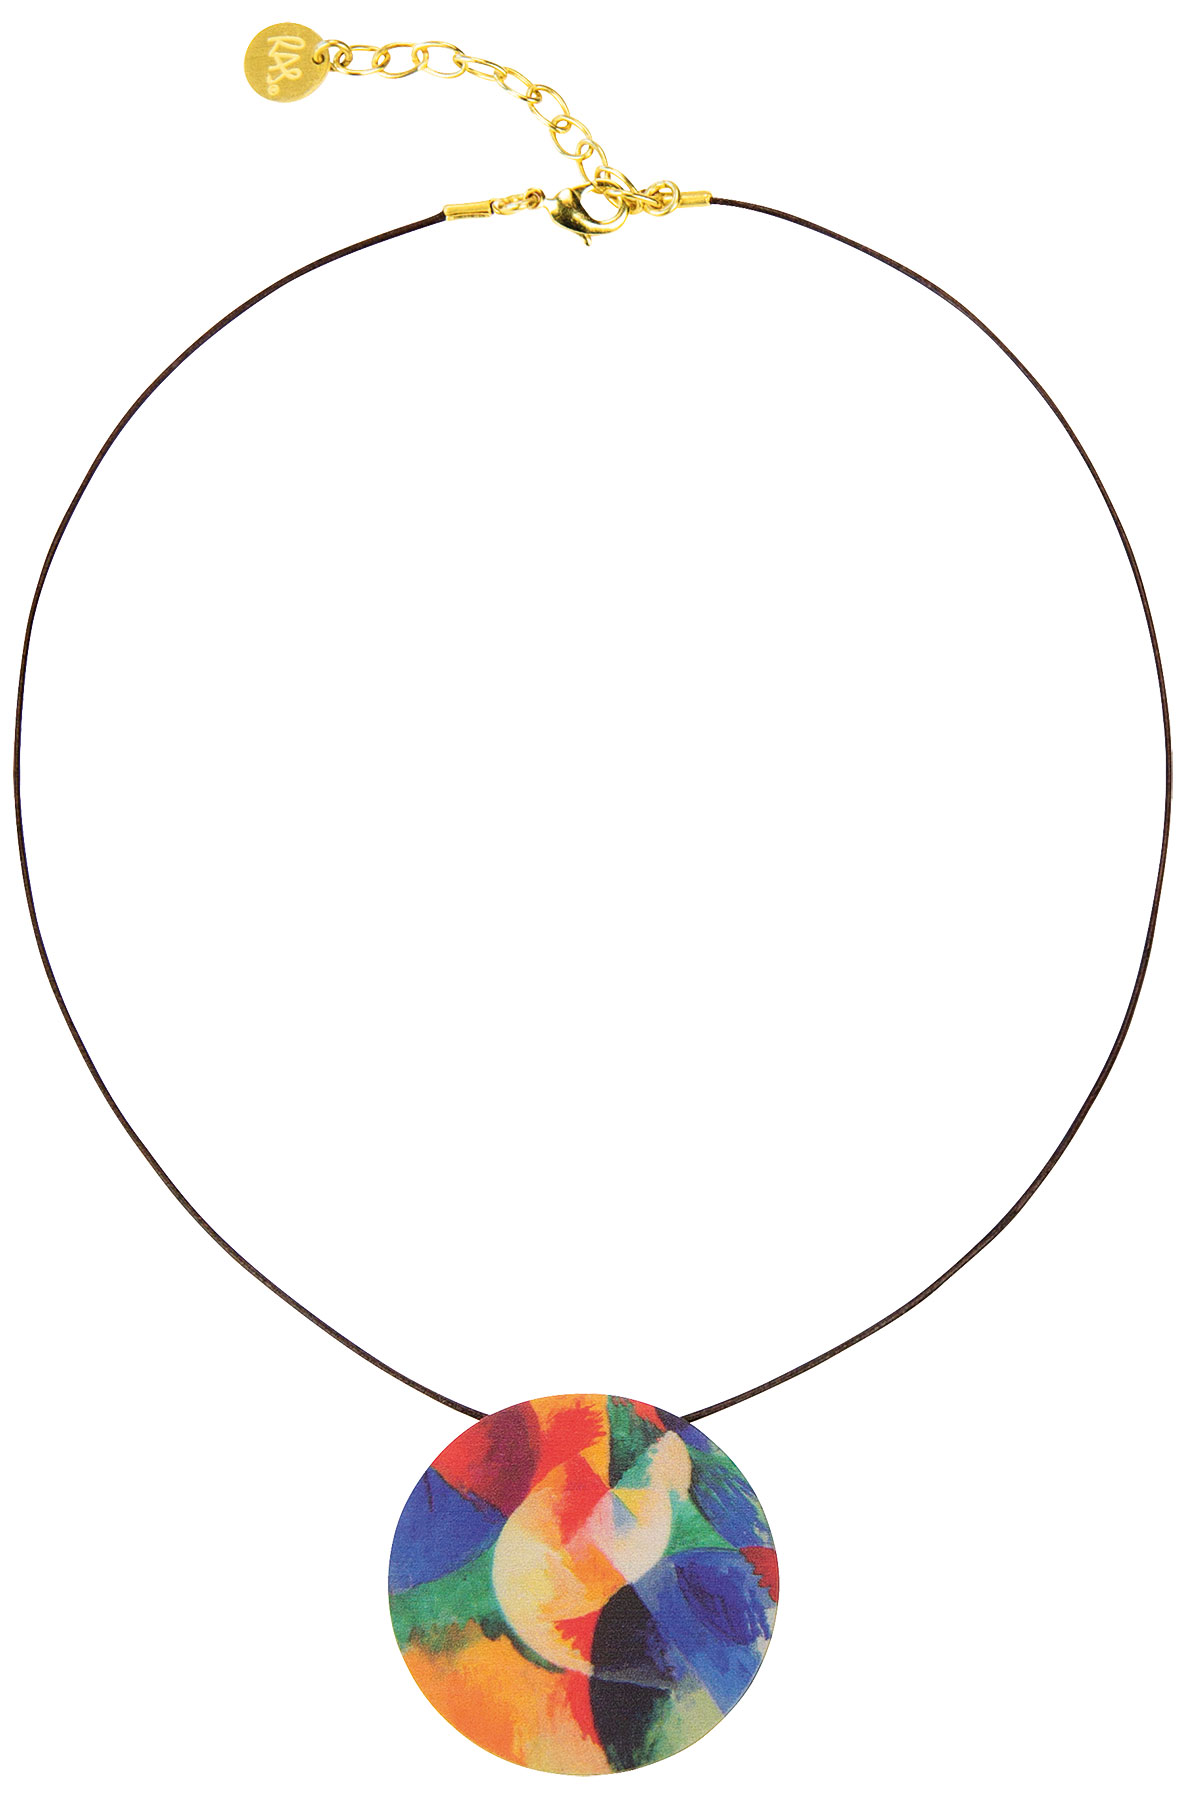 Necklace "Circle Shapes, Sun" with leather cord by Robert Delaunay